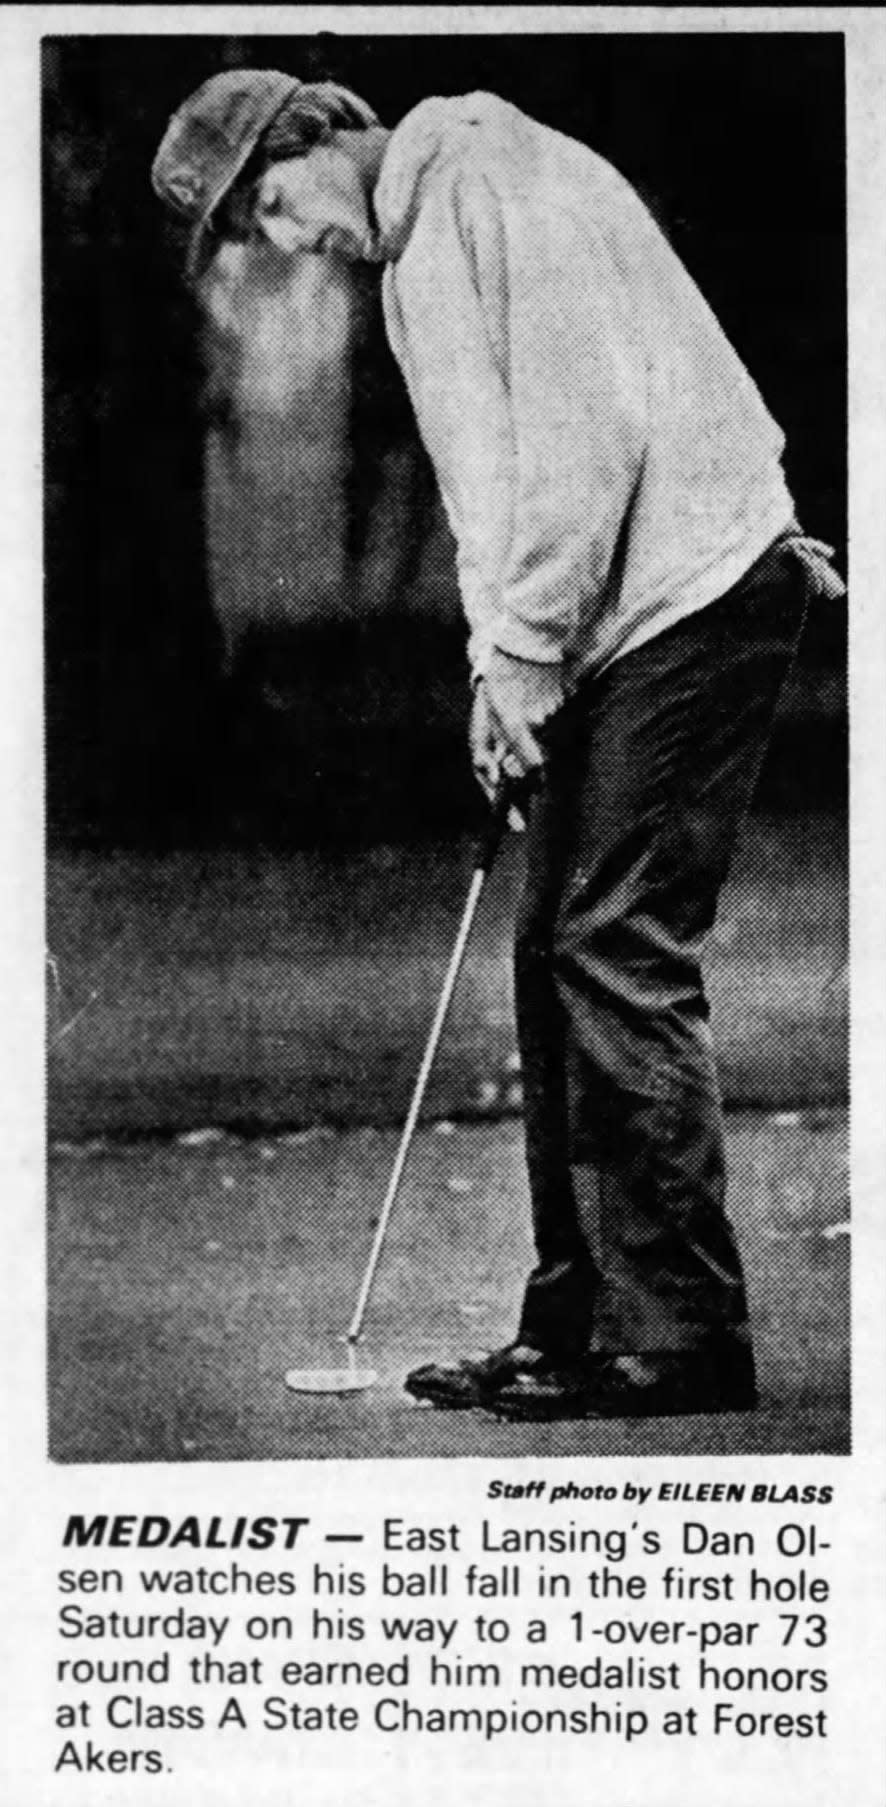 Dan Olsen won medalist honors in the Class A state finals in 1983 and also led East Lansing to the state championship.